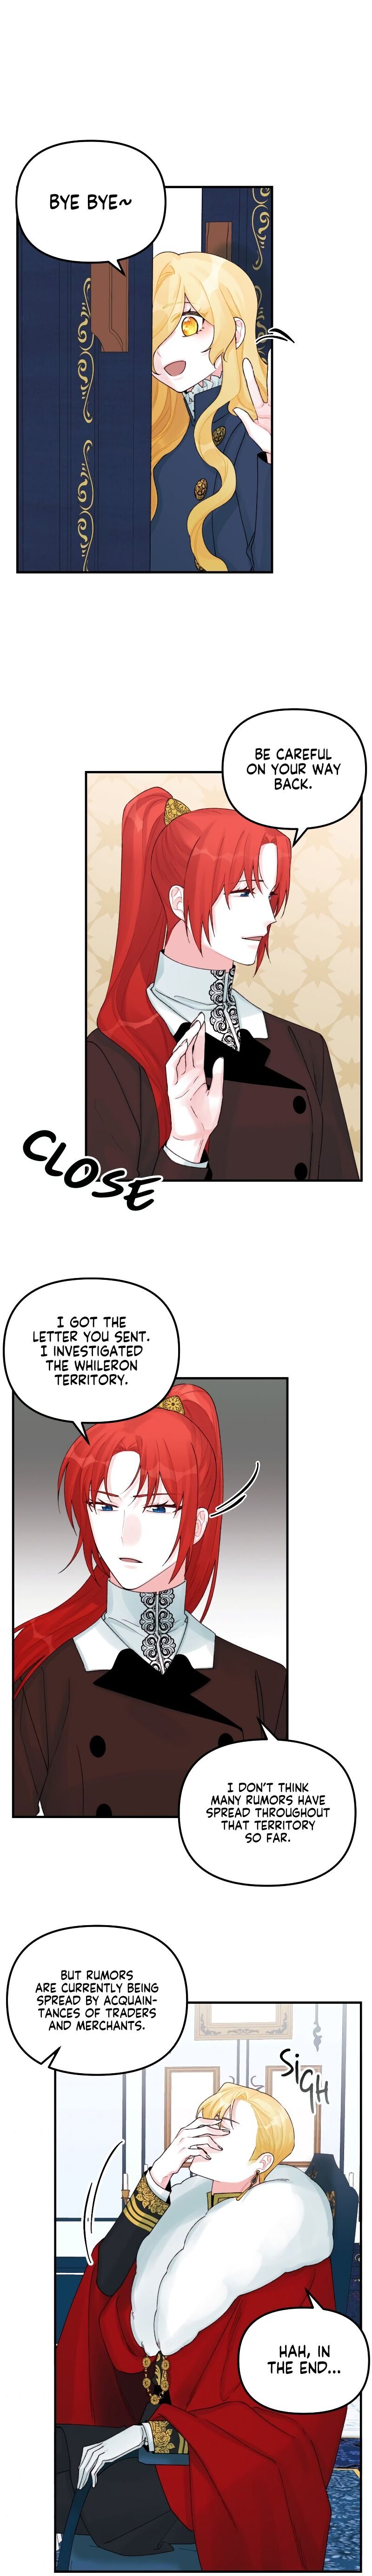 the-princess-in-the-dumpster-chap-30-13